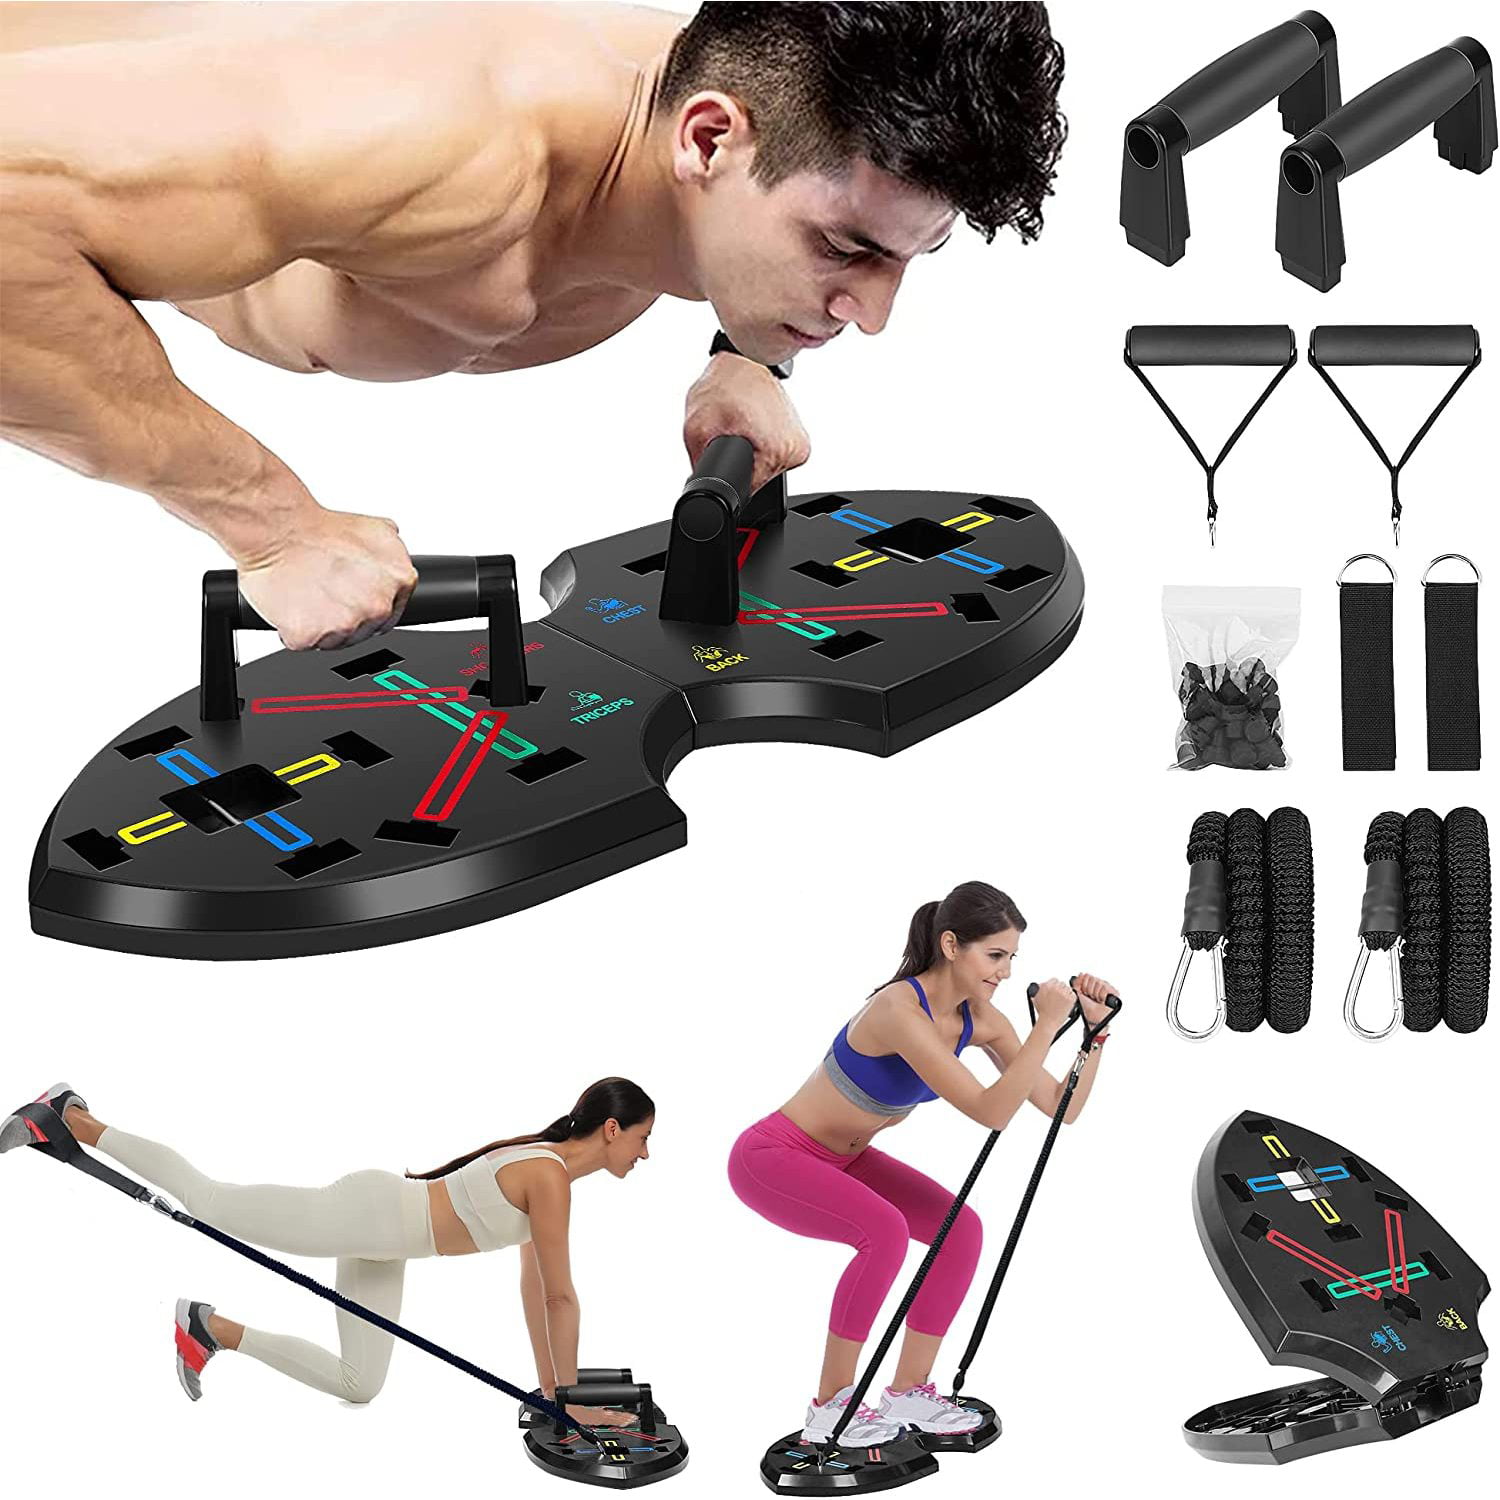 Foldable Push Up Board, Portable Home Gym with Resistance Bands, Ab Roller  Wheel, and 19 Fitness Accessories including Fitness Bars. Versatile Fitness